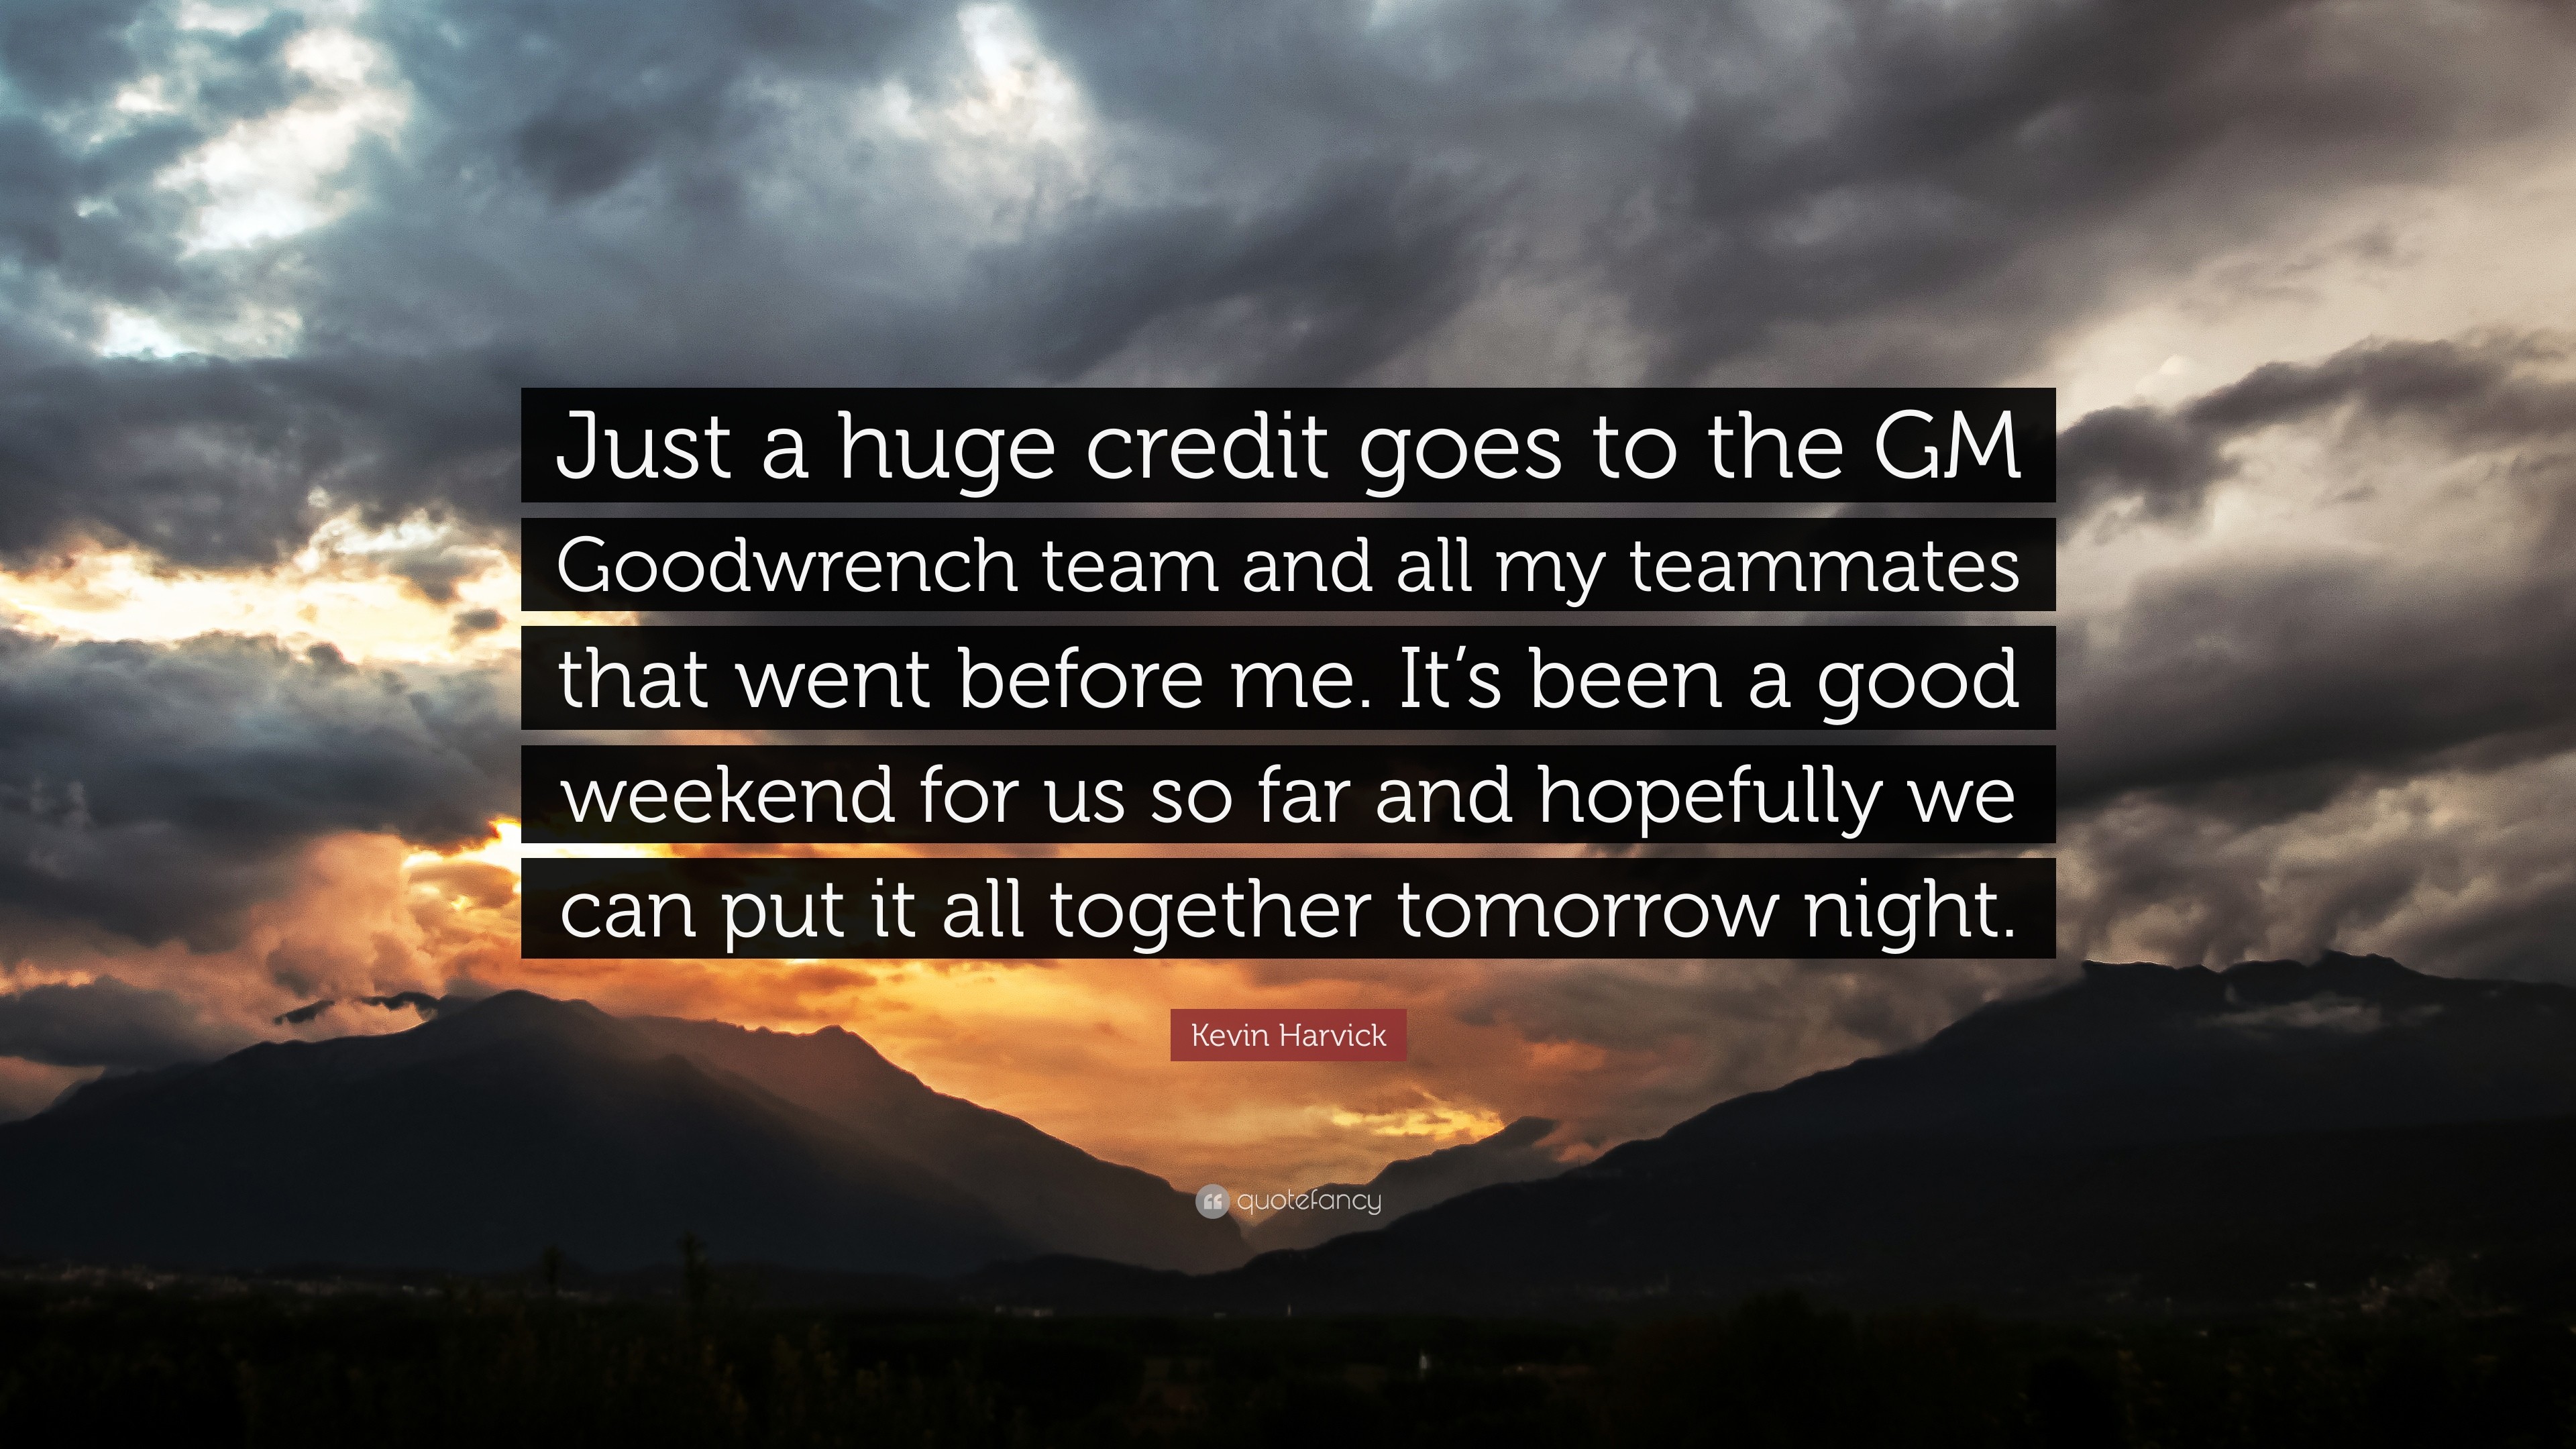 3840x2160 Kevin Harvick Quote: “Just a huge credit goes to the GM Goodwrench team and